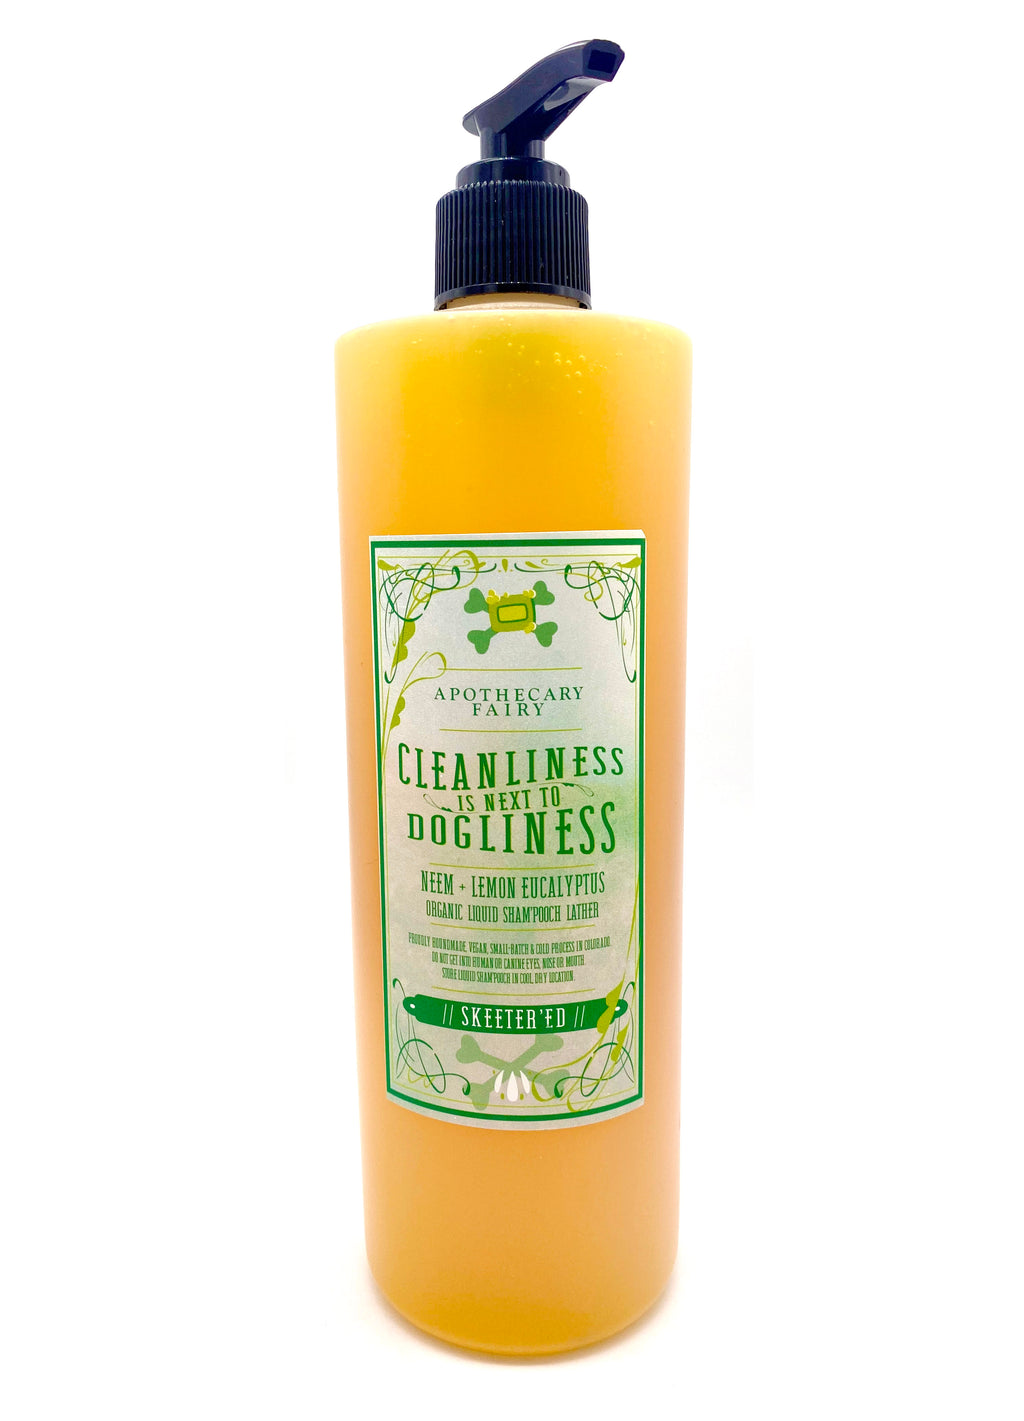 Cleanliness Is Next To Dogliness- Skeeter'ed Liquid Sham'pooch 16oz - The Apothecary Fairy